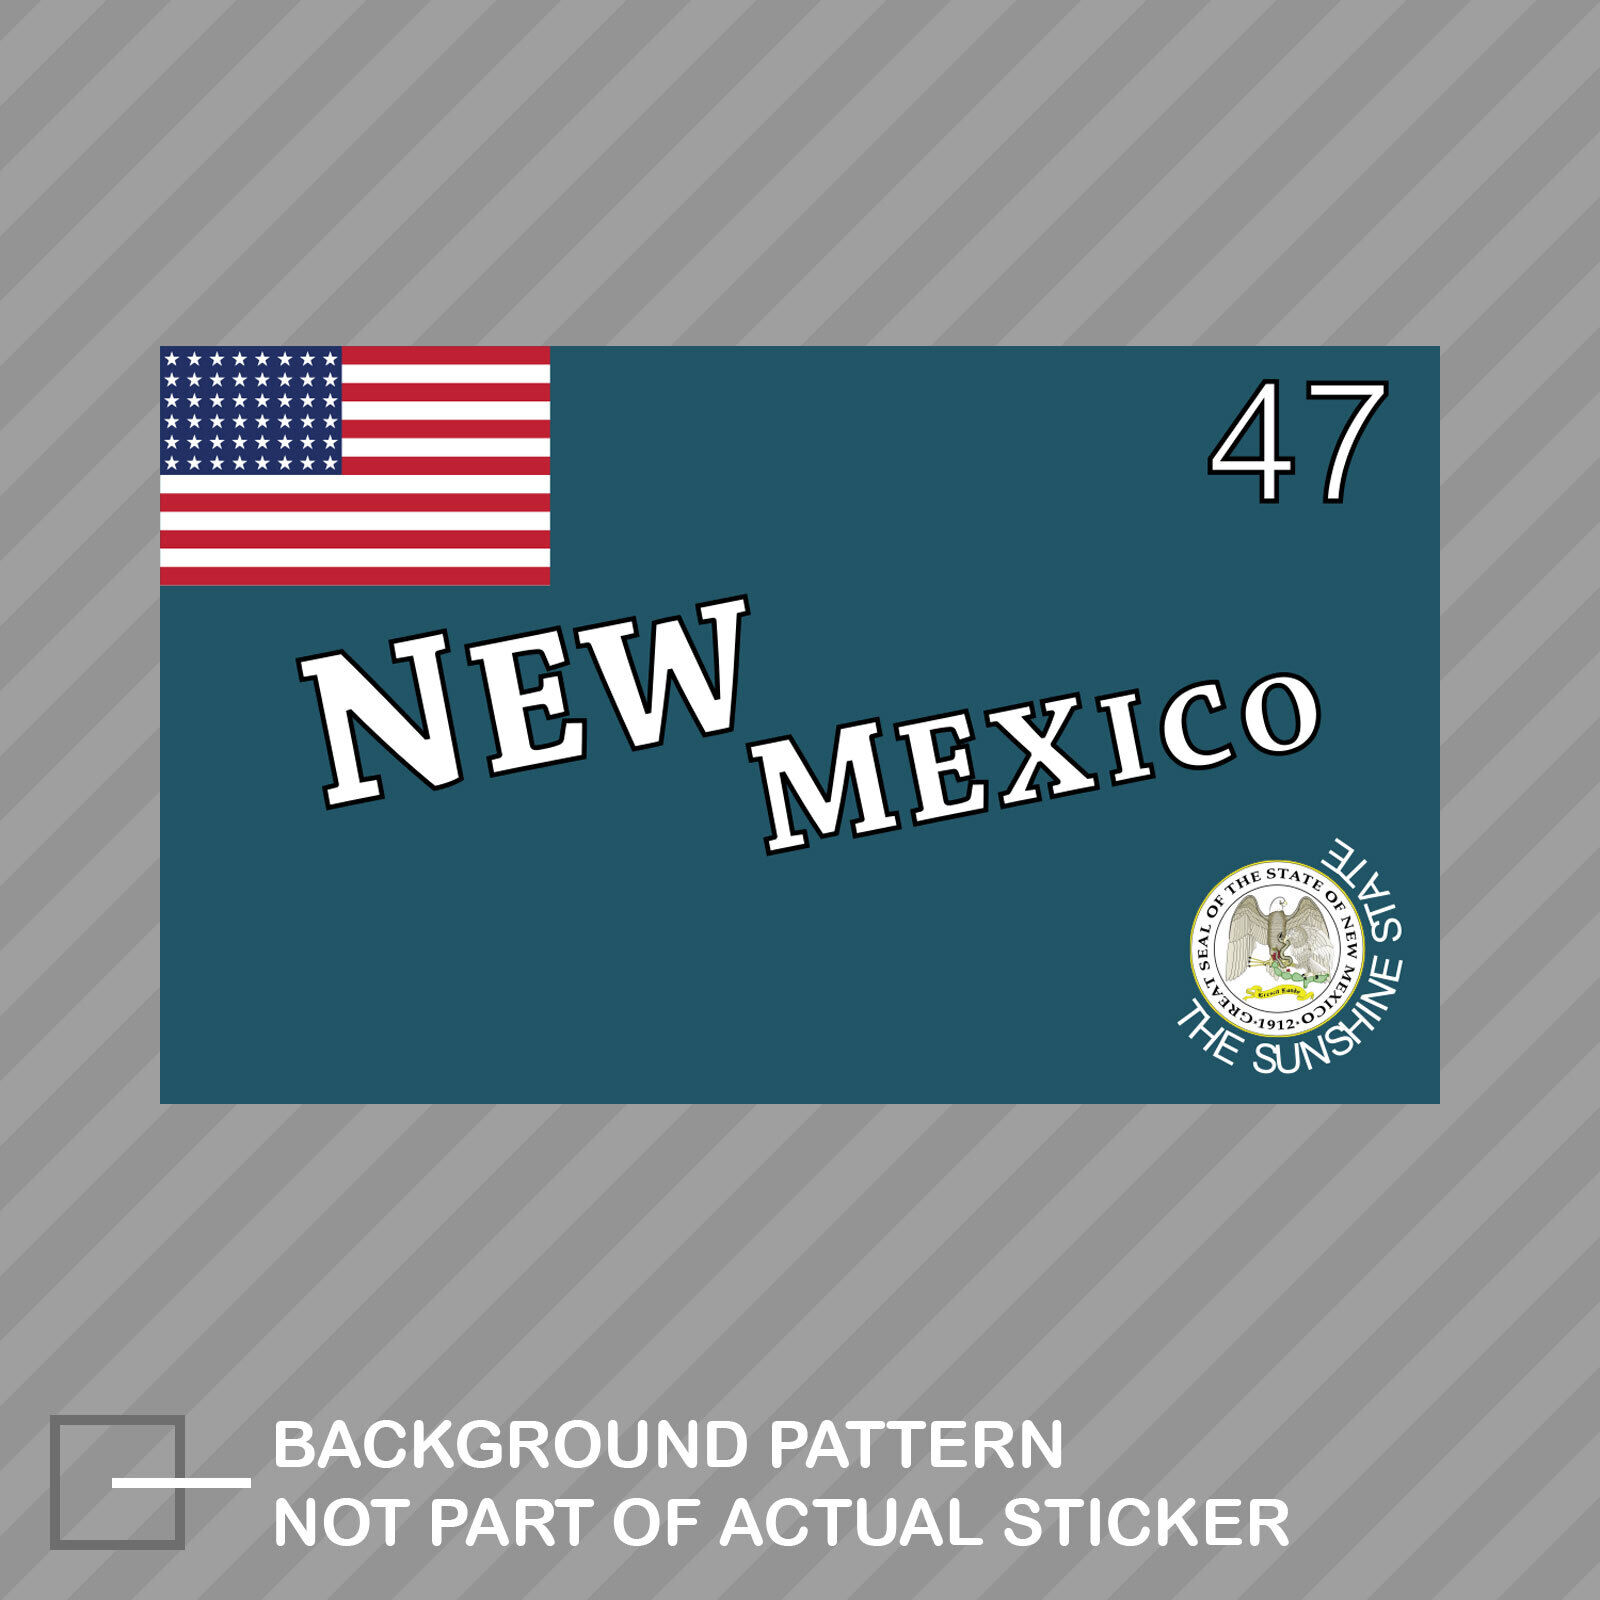 Unofficial New Mexico State Flag Sticker Decal Vinyl 1915 san diego worlds fair